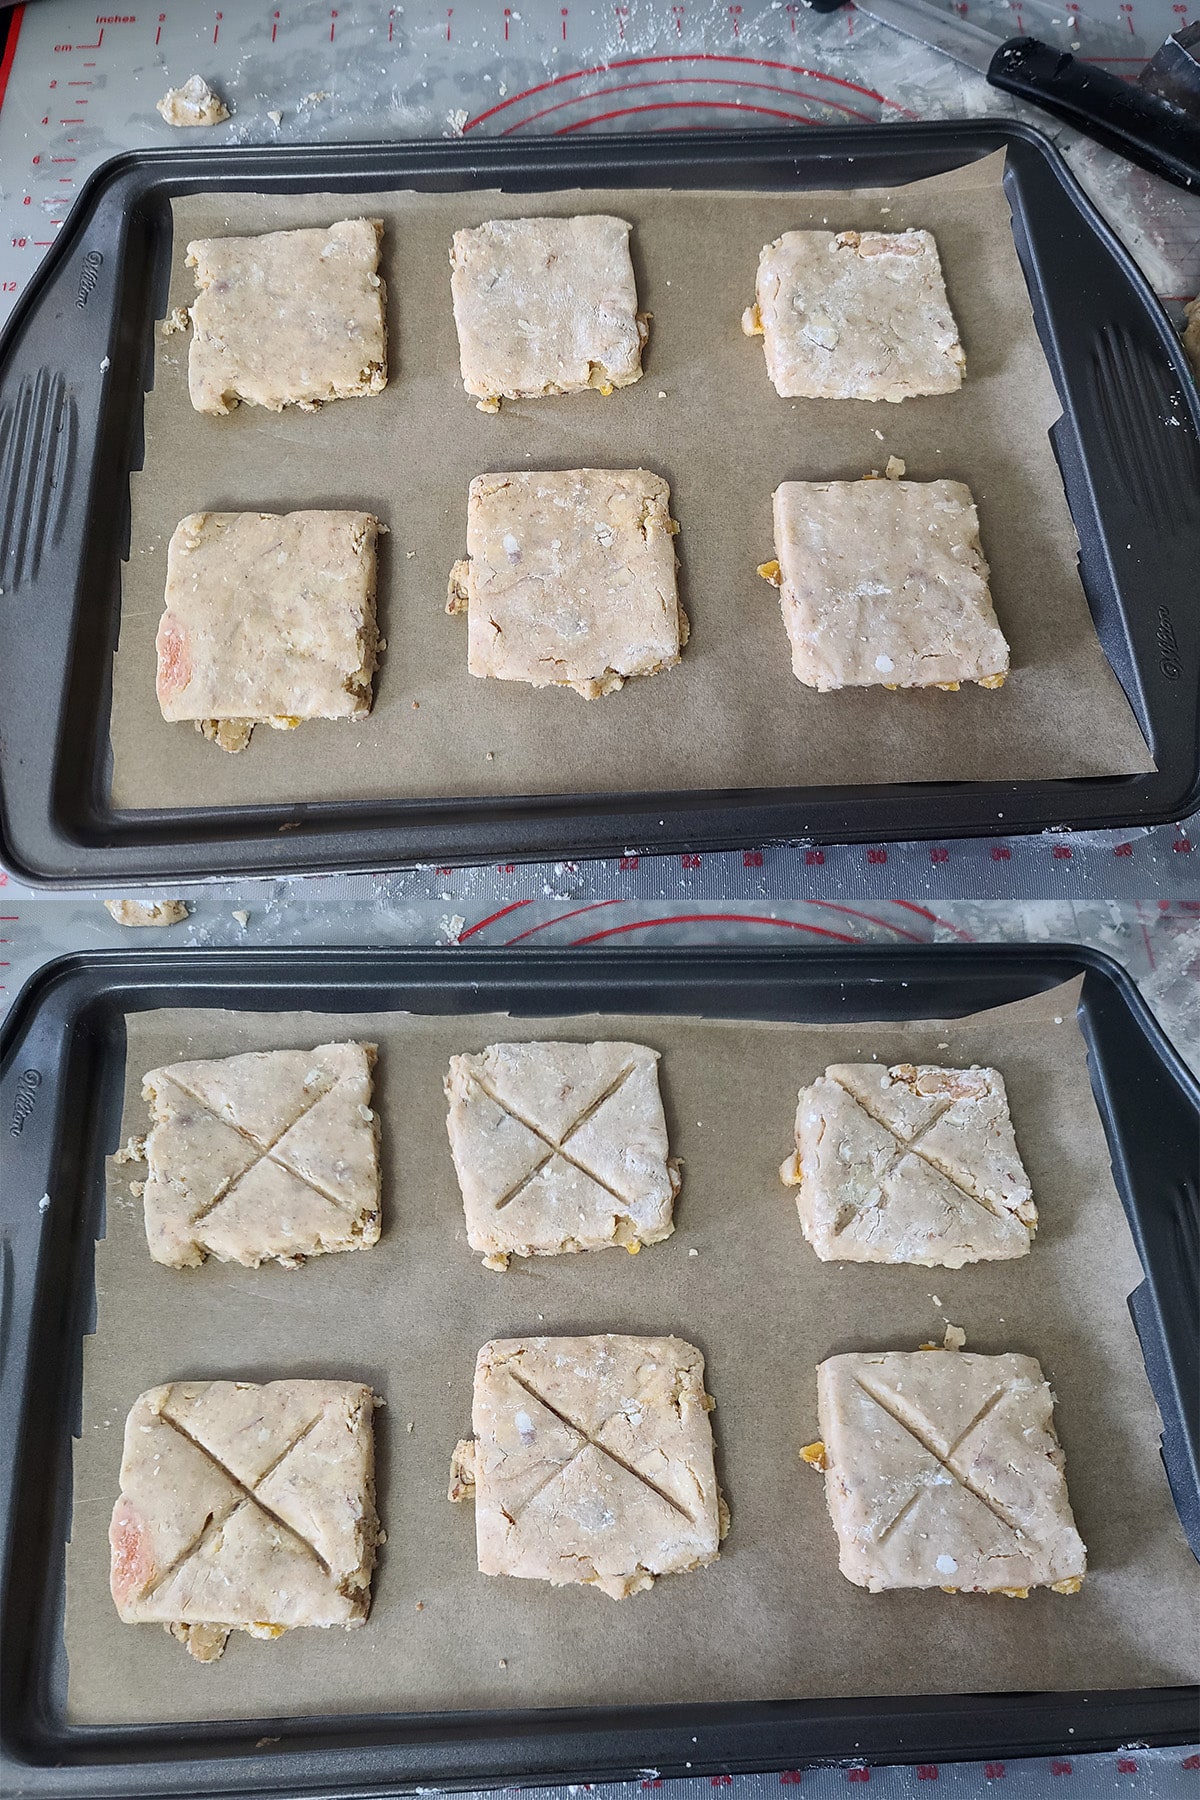 A 2 part image showing unbaked lembas on a prepared sheet pan, before and after each is marked with an X shape.